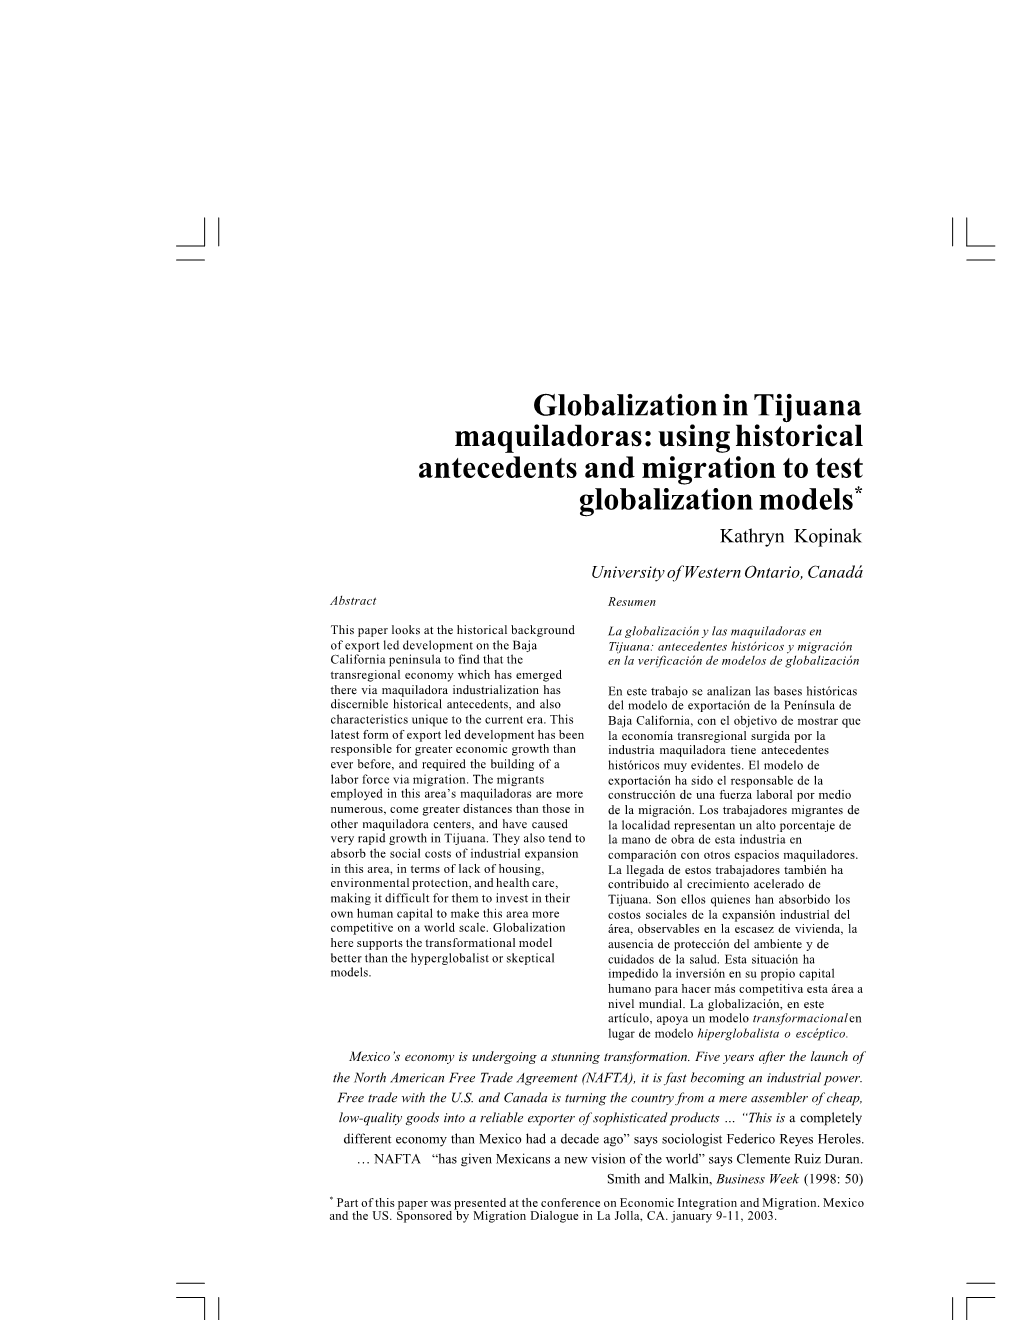 Globalization in Tijuana Maquiladoras: Using Historical Antecedents and Migration to Test Globalization Models* Kathryn Kopinak University of Western Ontario, Canadá